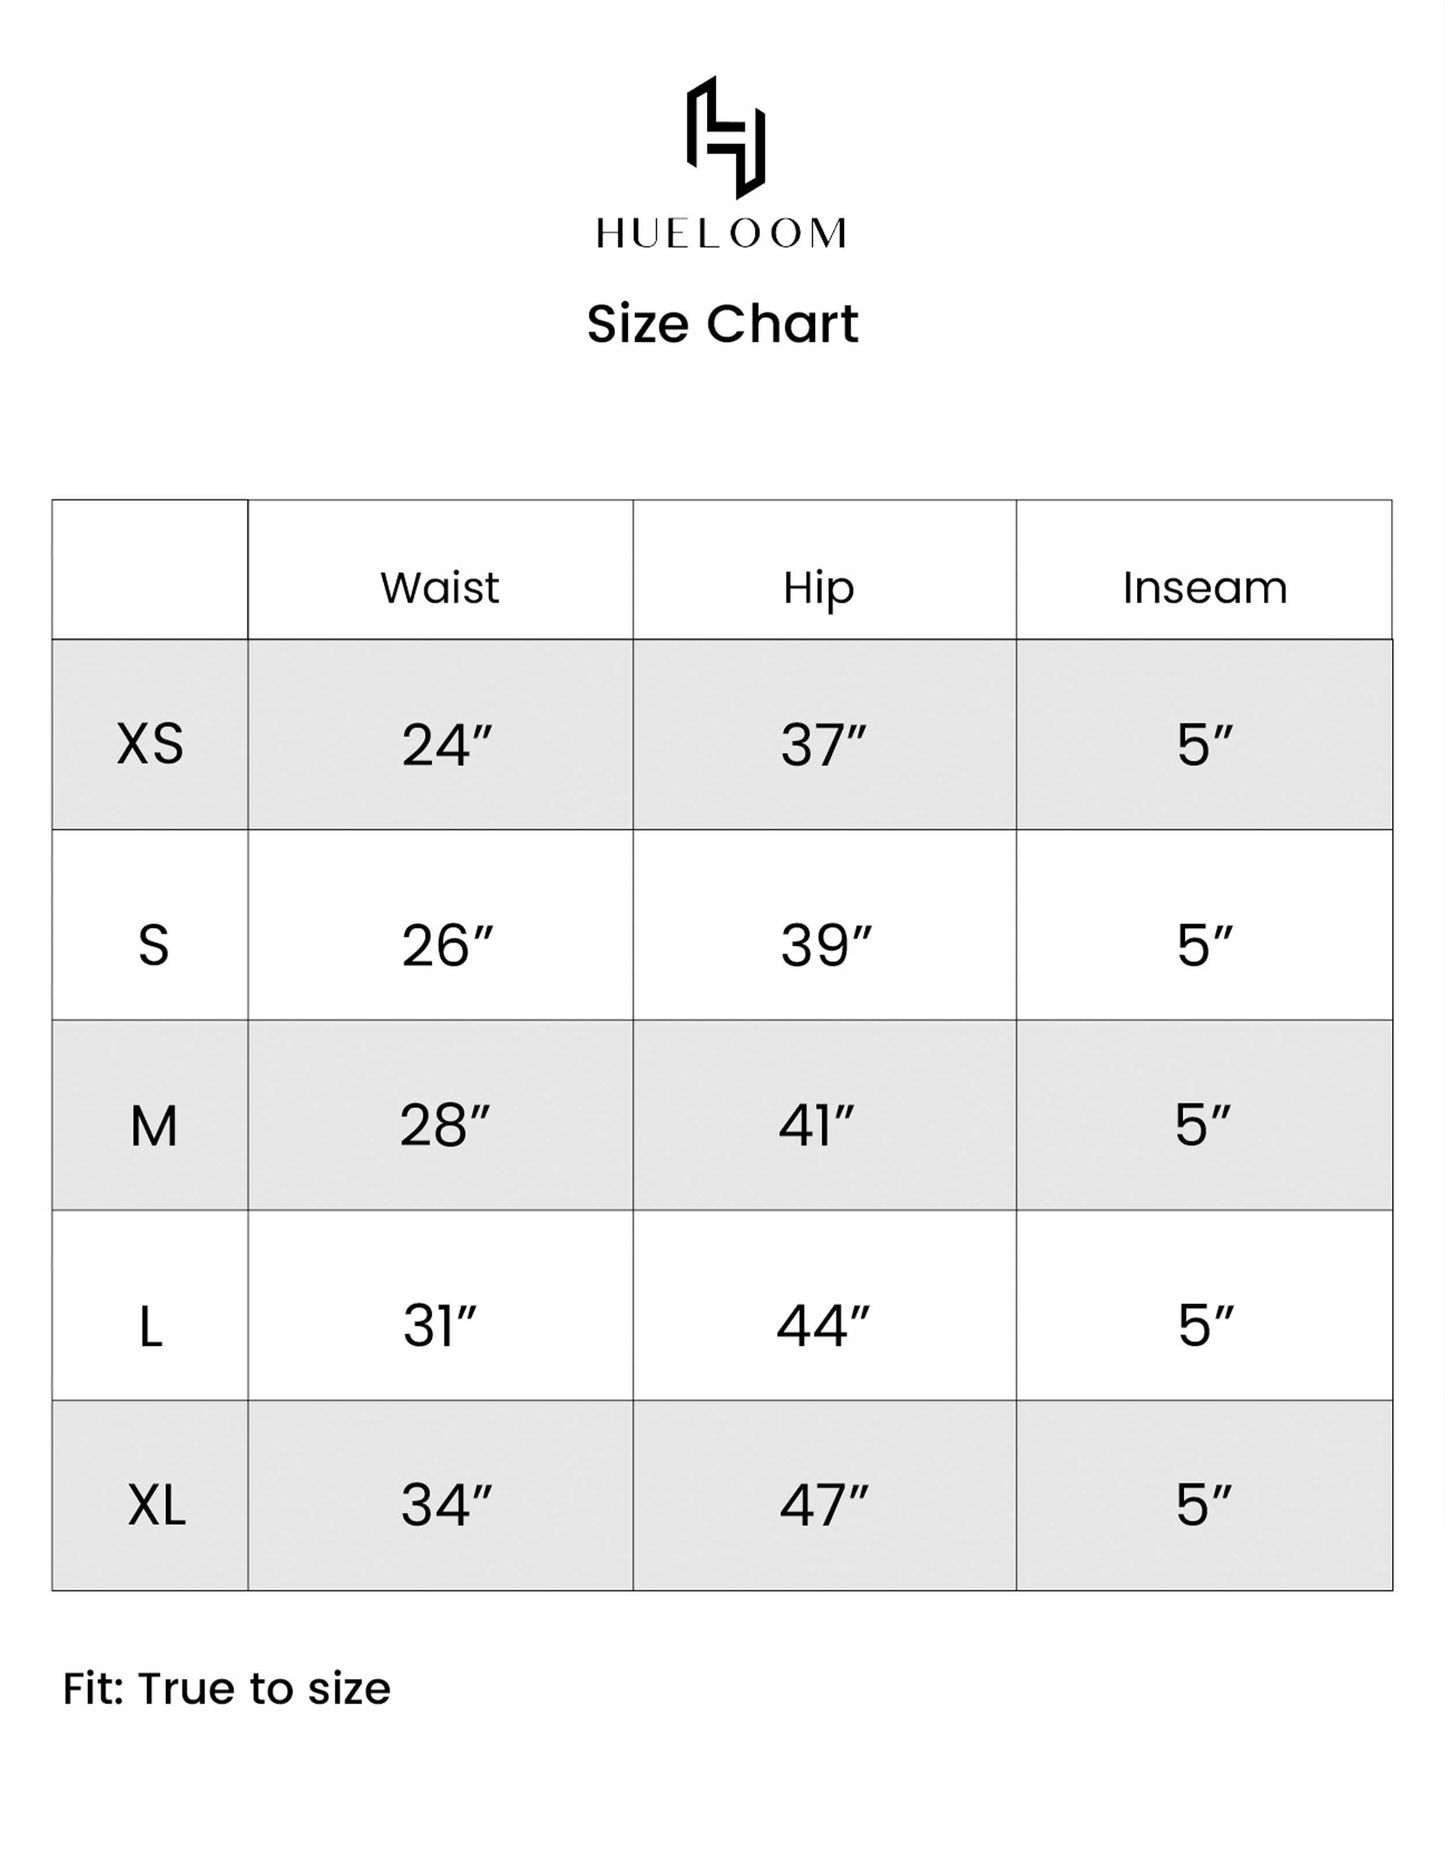 Hueloom's size chart guide for sizes XS, S, M, L, XL for suave reversible shorts